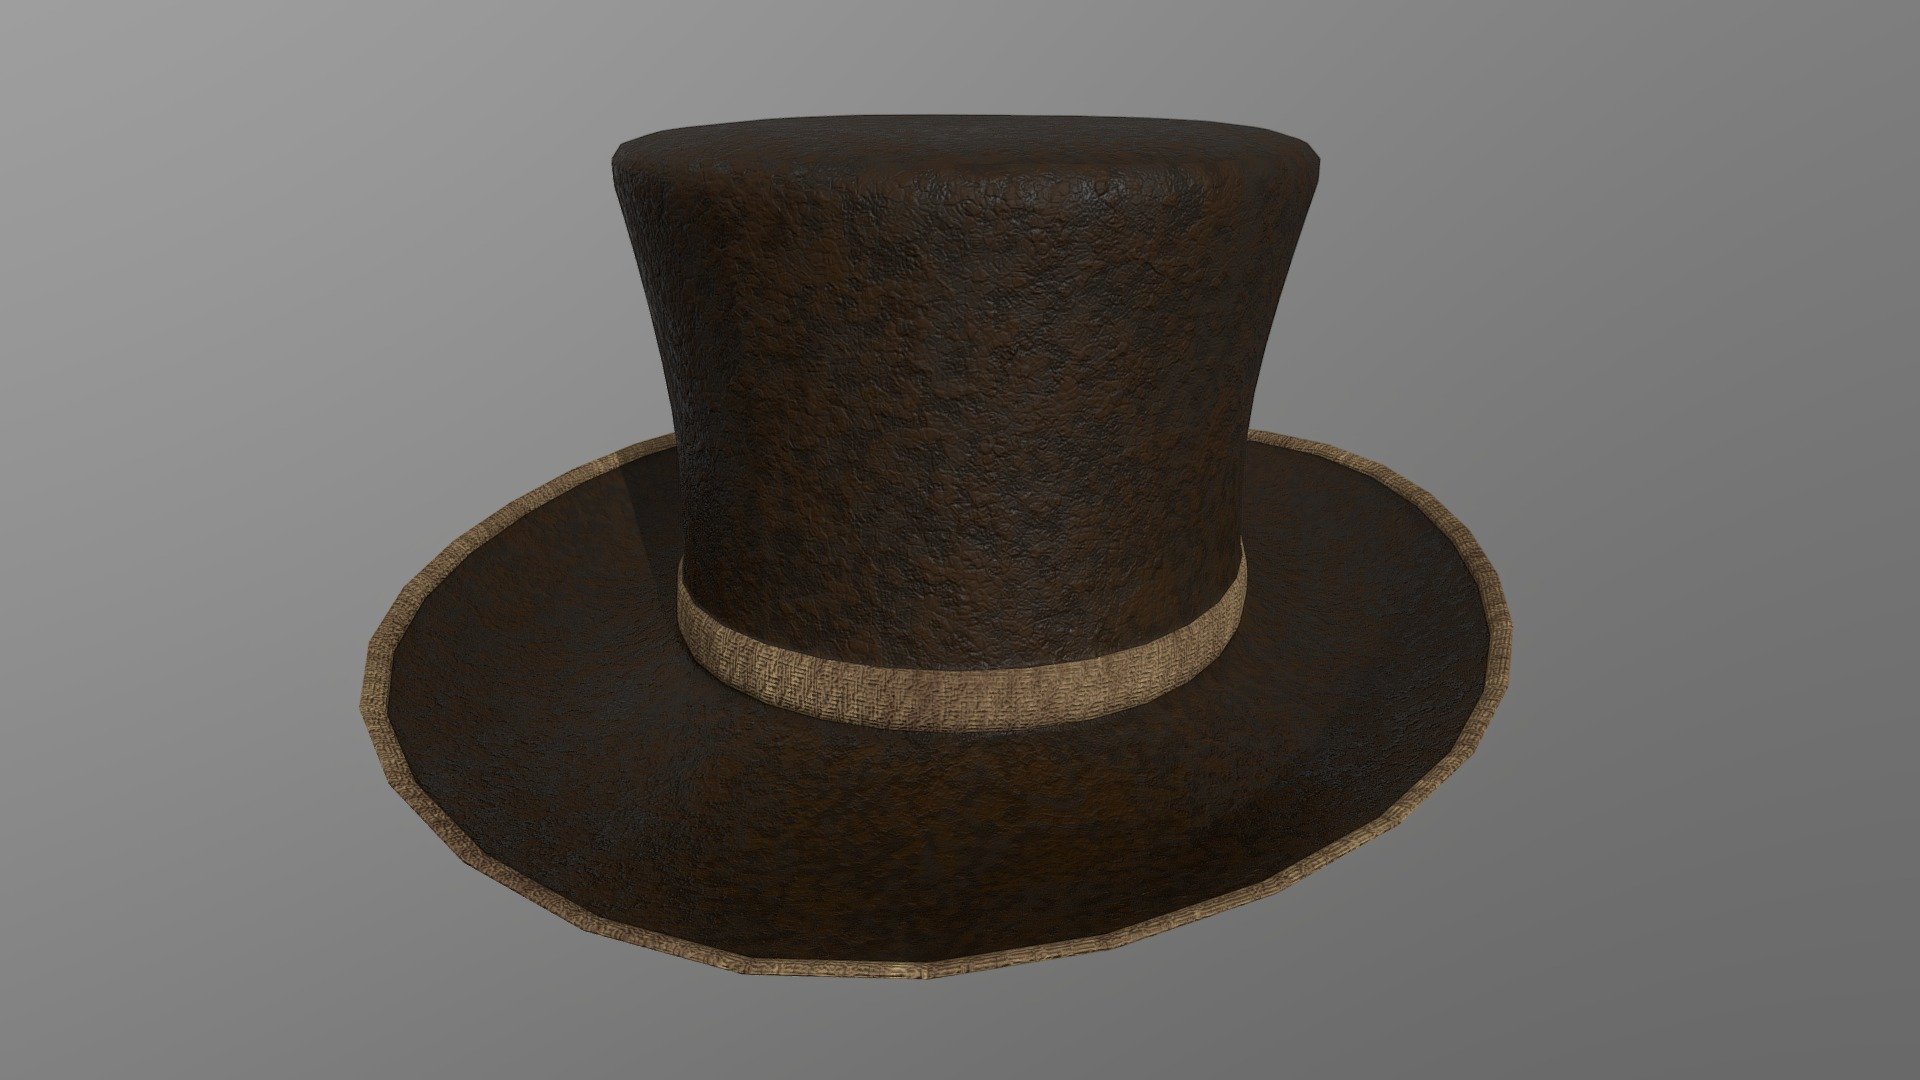 Top Hat (Brown)
Bring your 3D model of a Top Hat to life with this low-poly design. Perfect for use in games, animations, VR, AR, and more, this model is optimized for performance and still retains a high level of detail.


Features



Low poly design with 2,129 vertices

4,240 edges

2,112 faces (polygons)

4,224 tris

2k PBR Textures and materials

File formats included: .obj, .fbx, .dae


Tools Used
This Top Hat 3D model was created using Blender 3.3.1, a popular and versatile 3D creation software.


Availability
This low-poly Top Hat 3D model is ready for use and available for purchase. Bring your project to the next level with this high-quality and optimized model 3d model